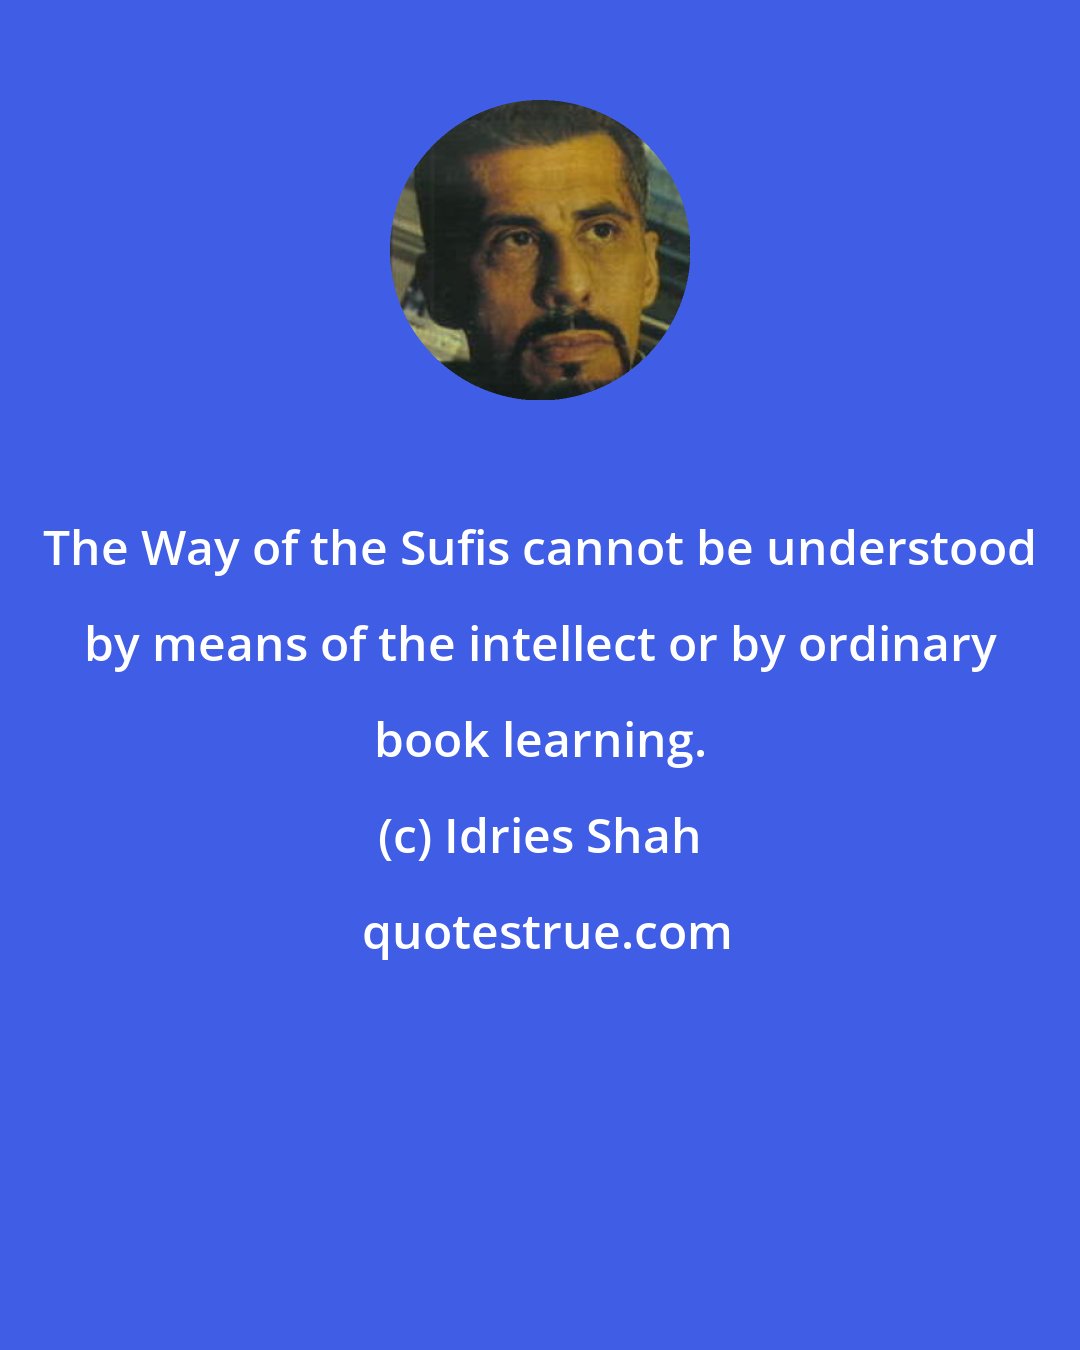 Idries Shah: The Way of the Sufis cannot be understood by means of the intellect or by ordinary book learning.